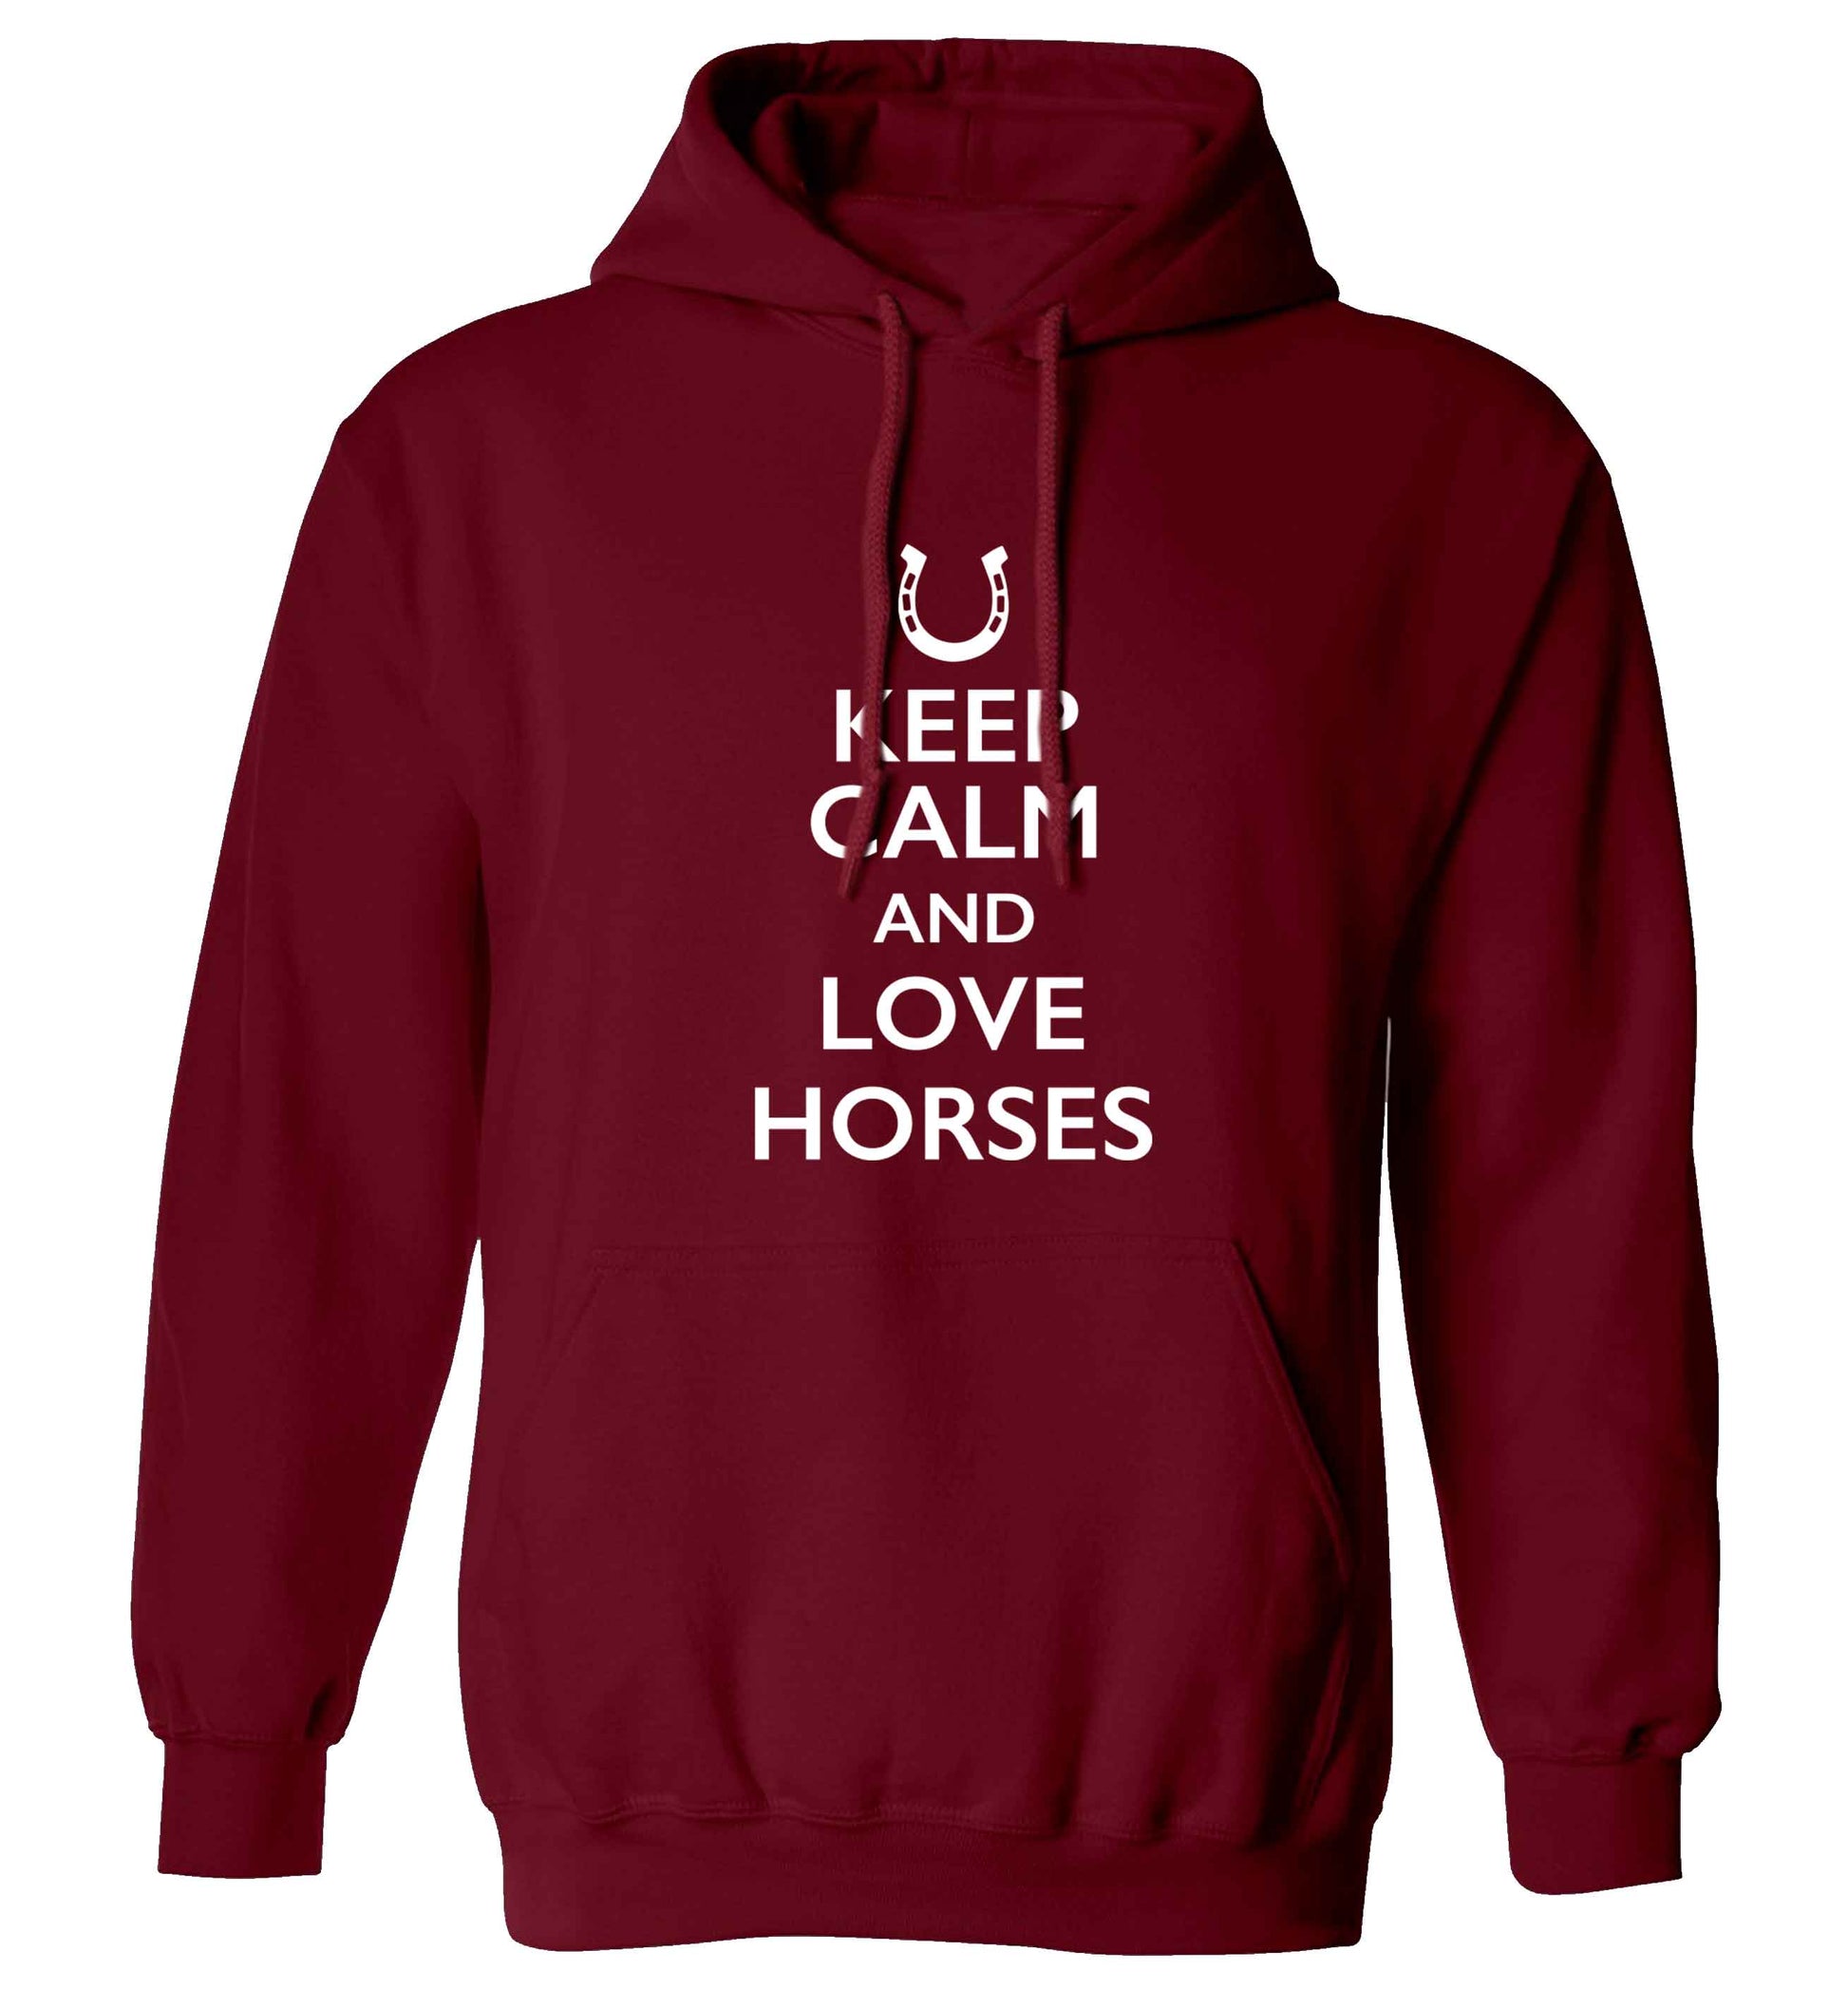 Keep calm and love horses adults unisex maroon hoodie 2XL